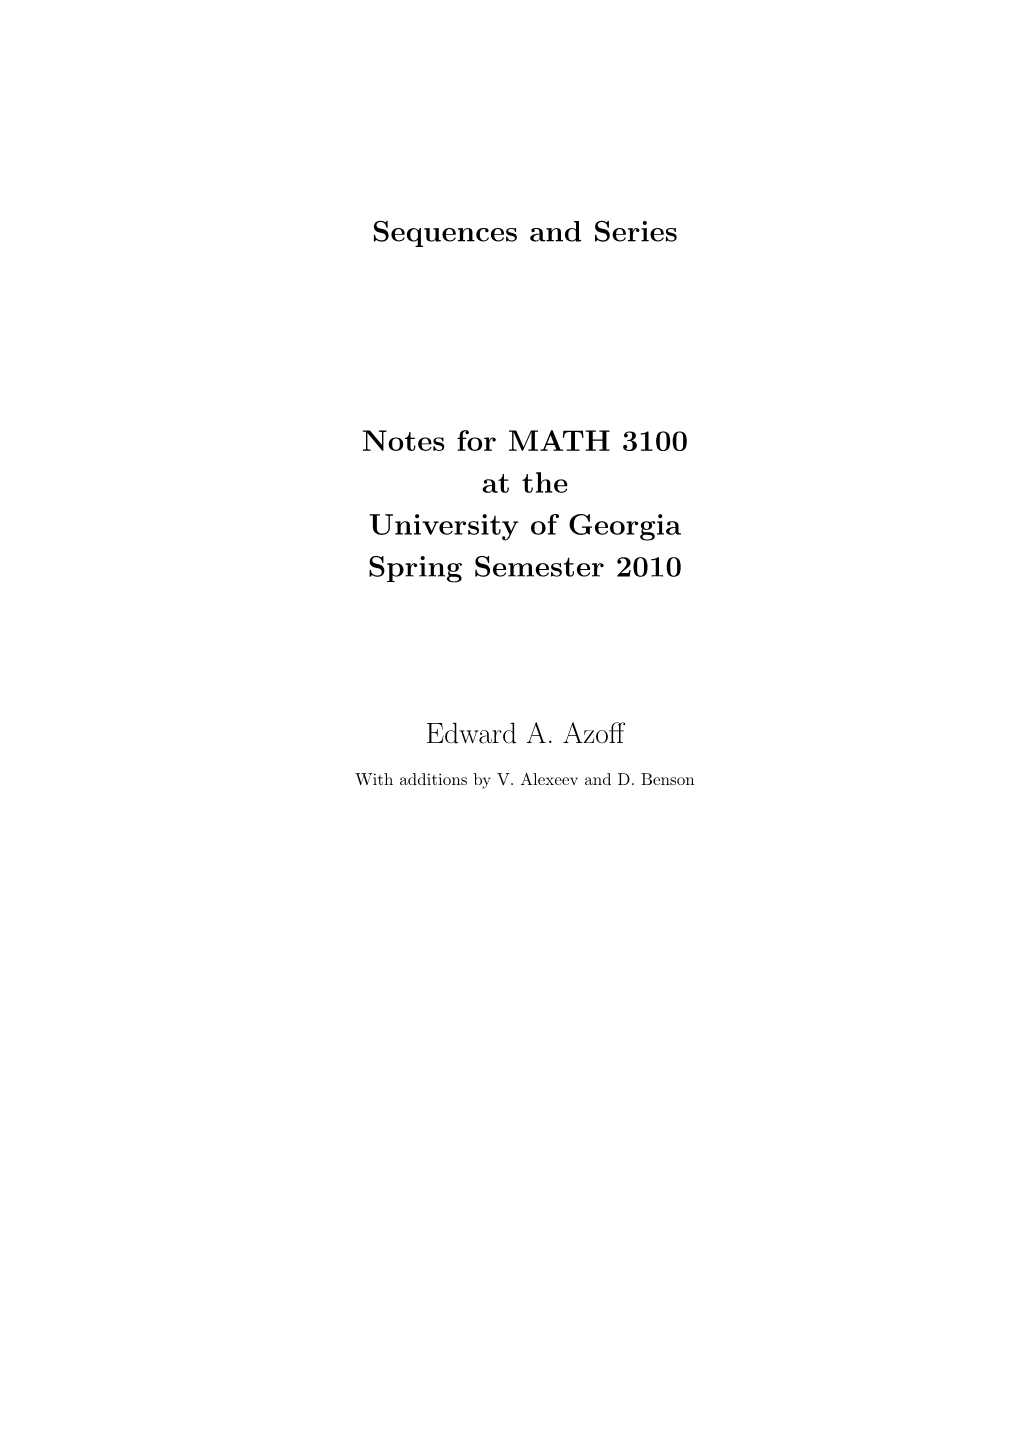 Sequences and Series Notes for MATH 3100 at the University Of